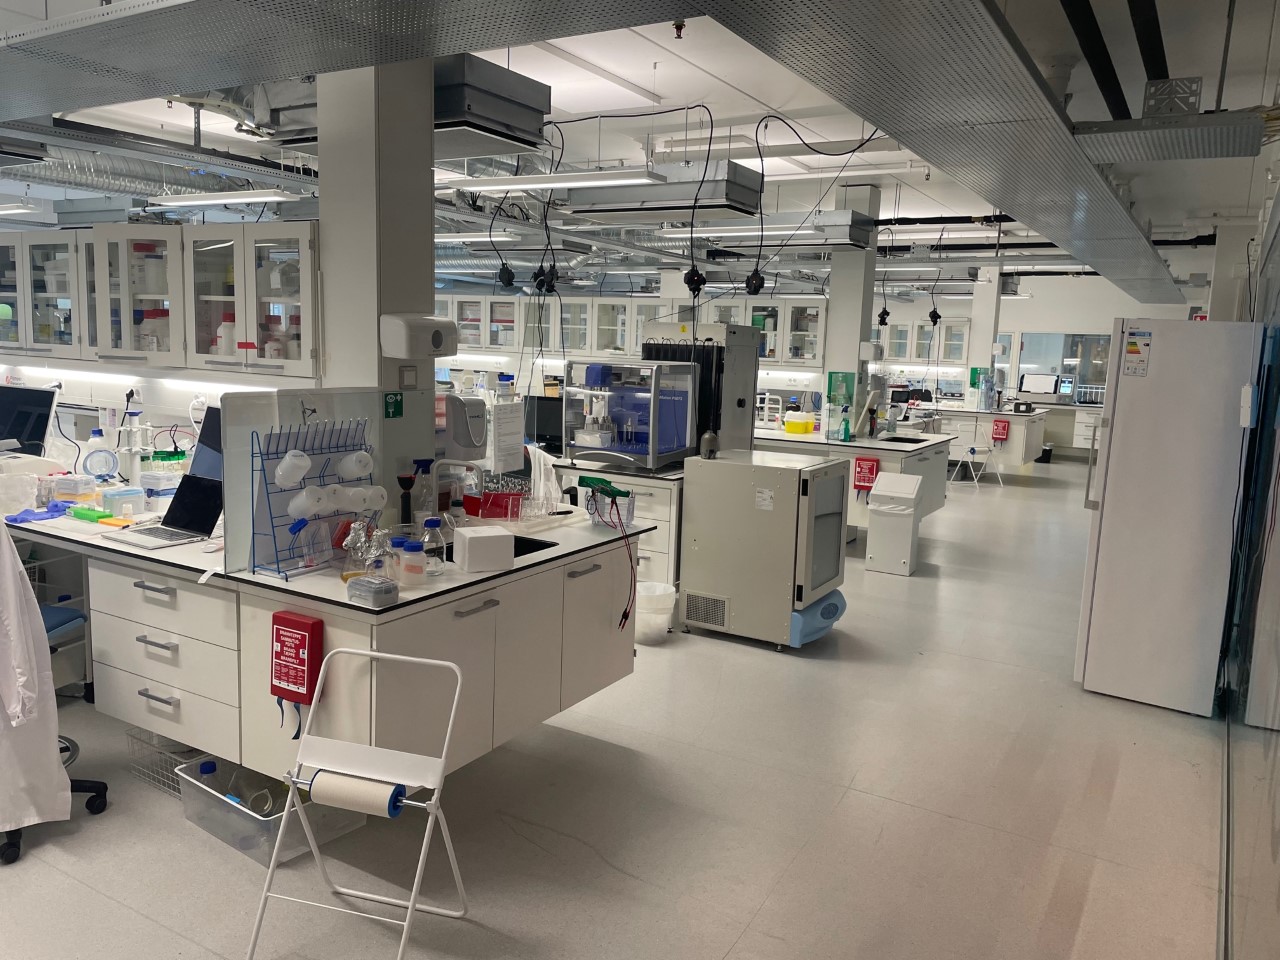 Medical Laboratory from the Innovation Hub in Oslo